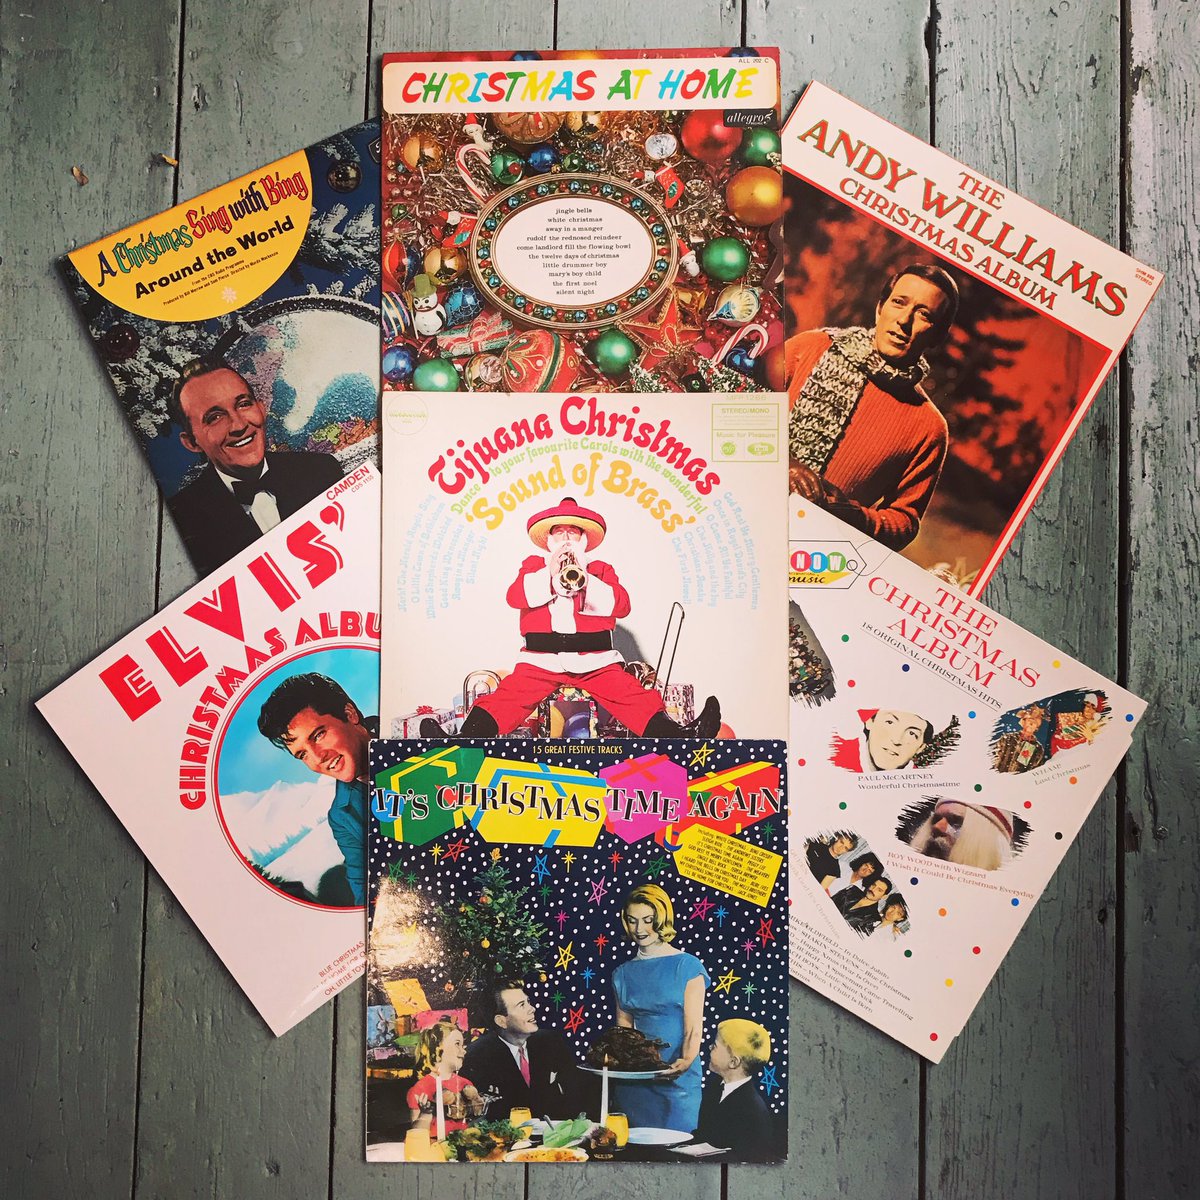 Just some of the cheesy Christmas vinyl we have for our late night shopping party tonight!! Bet you can’t wait!!!?#vintageshop #vintageseller #vintagechristmas 
#christmastunes #christmasfun 
#latenightshopping #shopindependentthischristmas 
#kirkdalehighstreet #se23 #se26